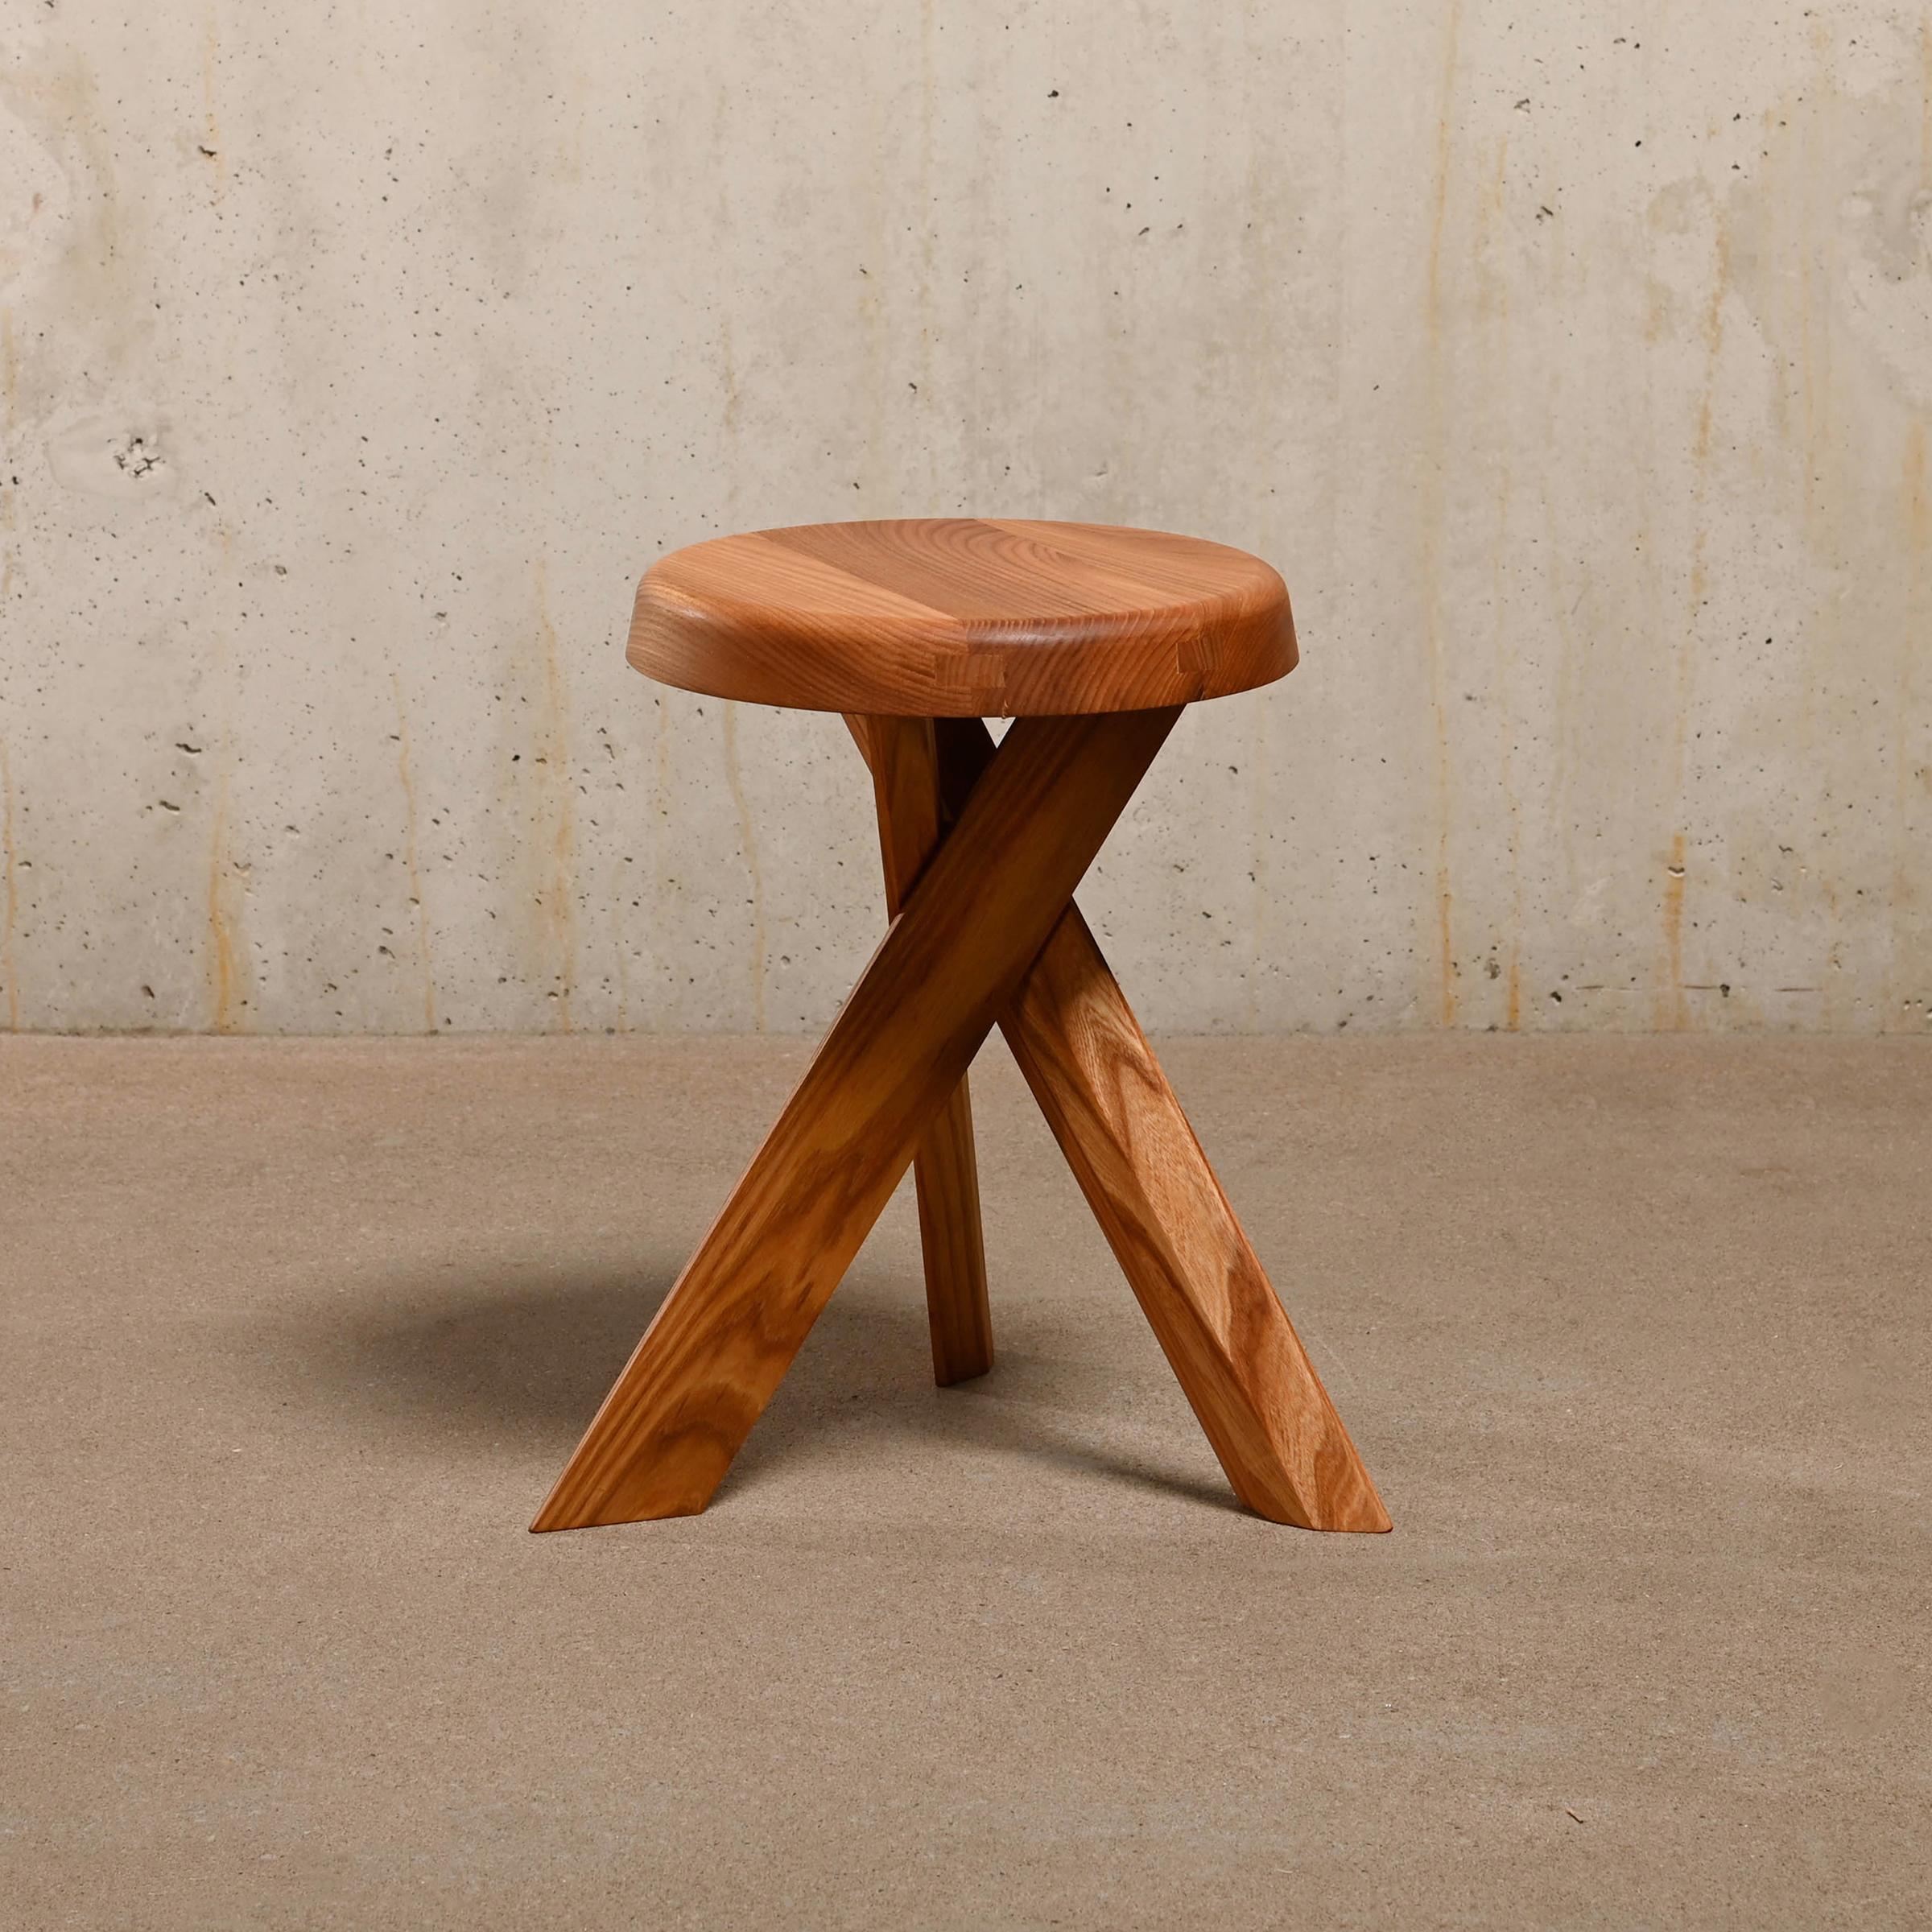 Stool S31 (model A) designed by Pierre Chapo around 1960 and manufactured by Chapo Création in France, 2024. Solid elmwood finished in naturel oil. Excellent original condition and signed by manufacture stamp.

The wood drawing and grain of the